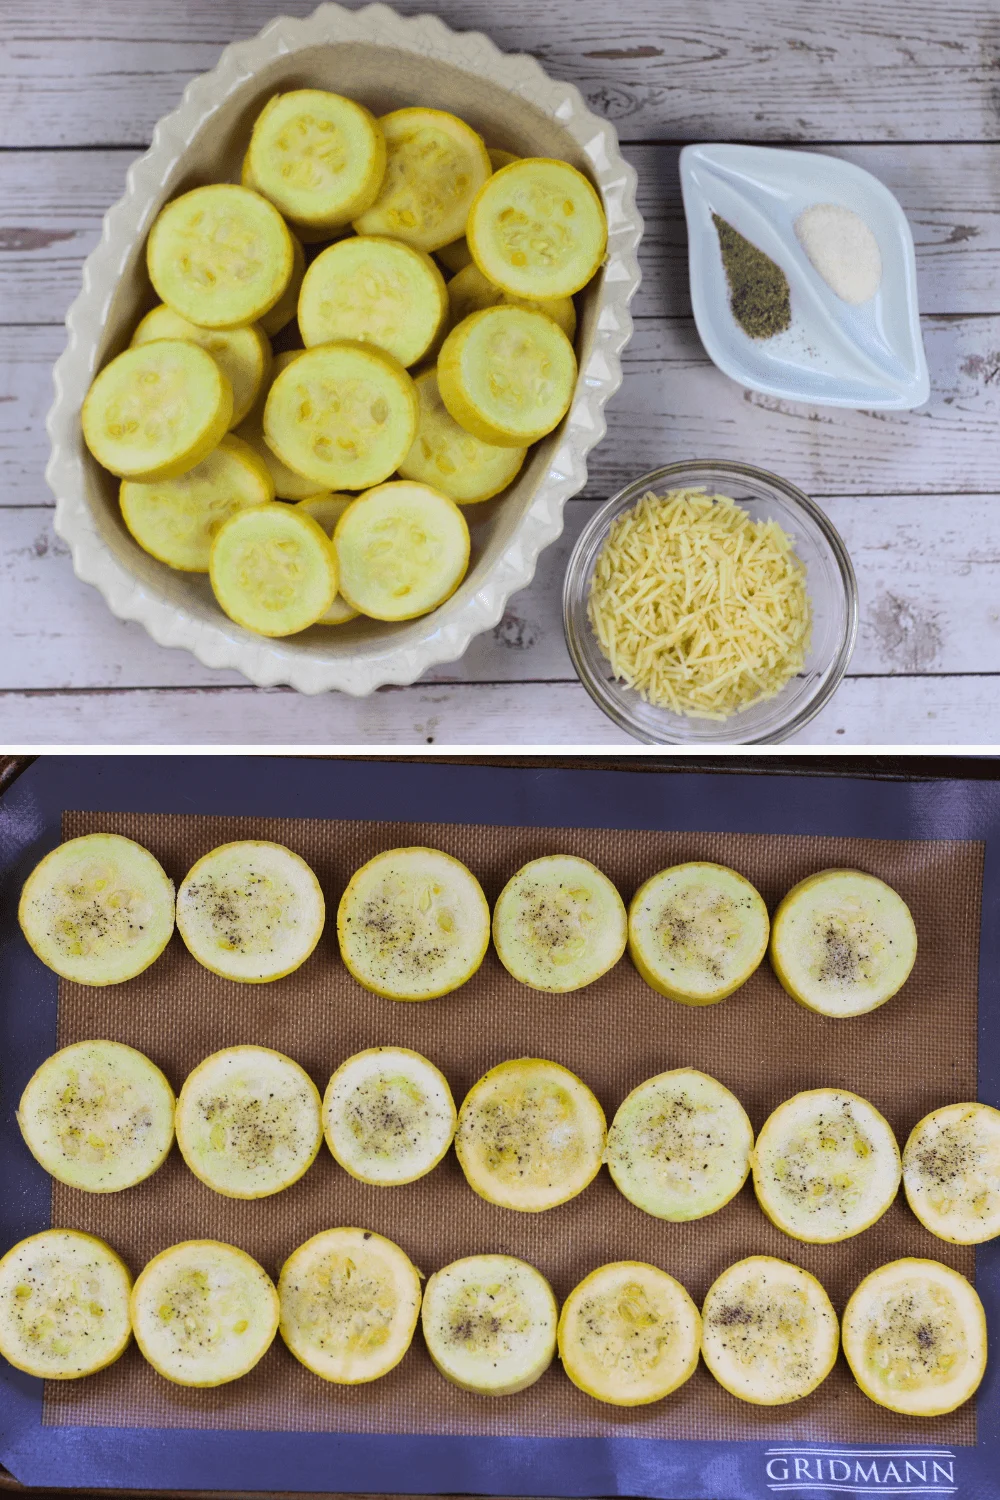 slices of yellow squash in baking pan